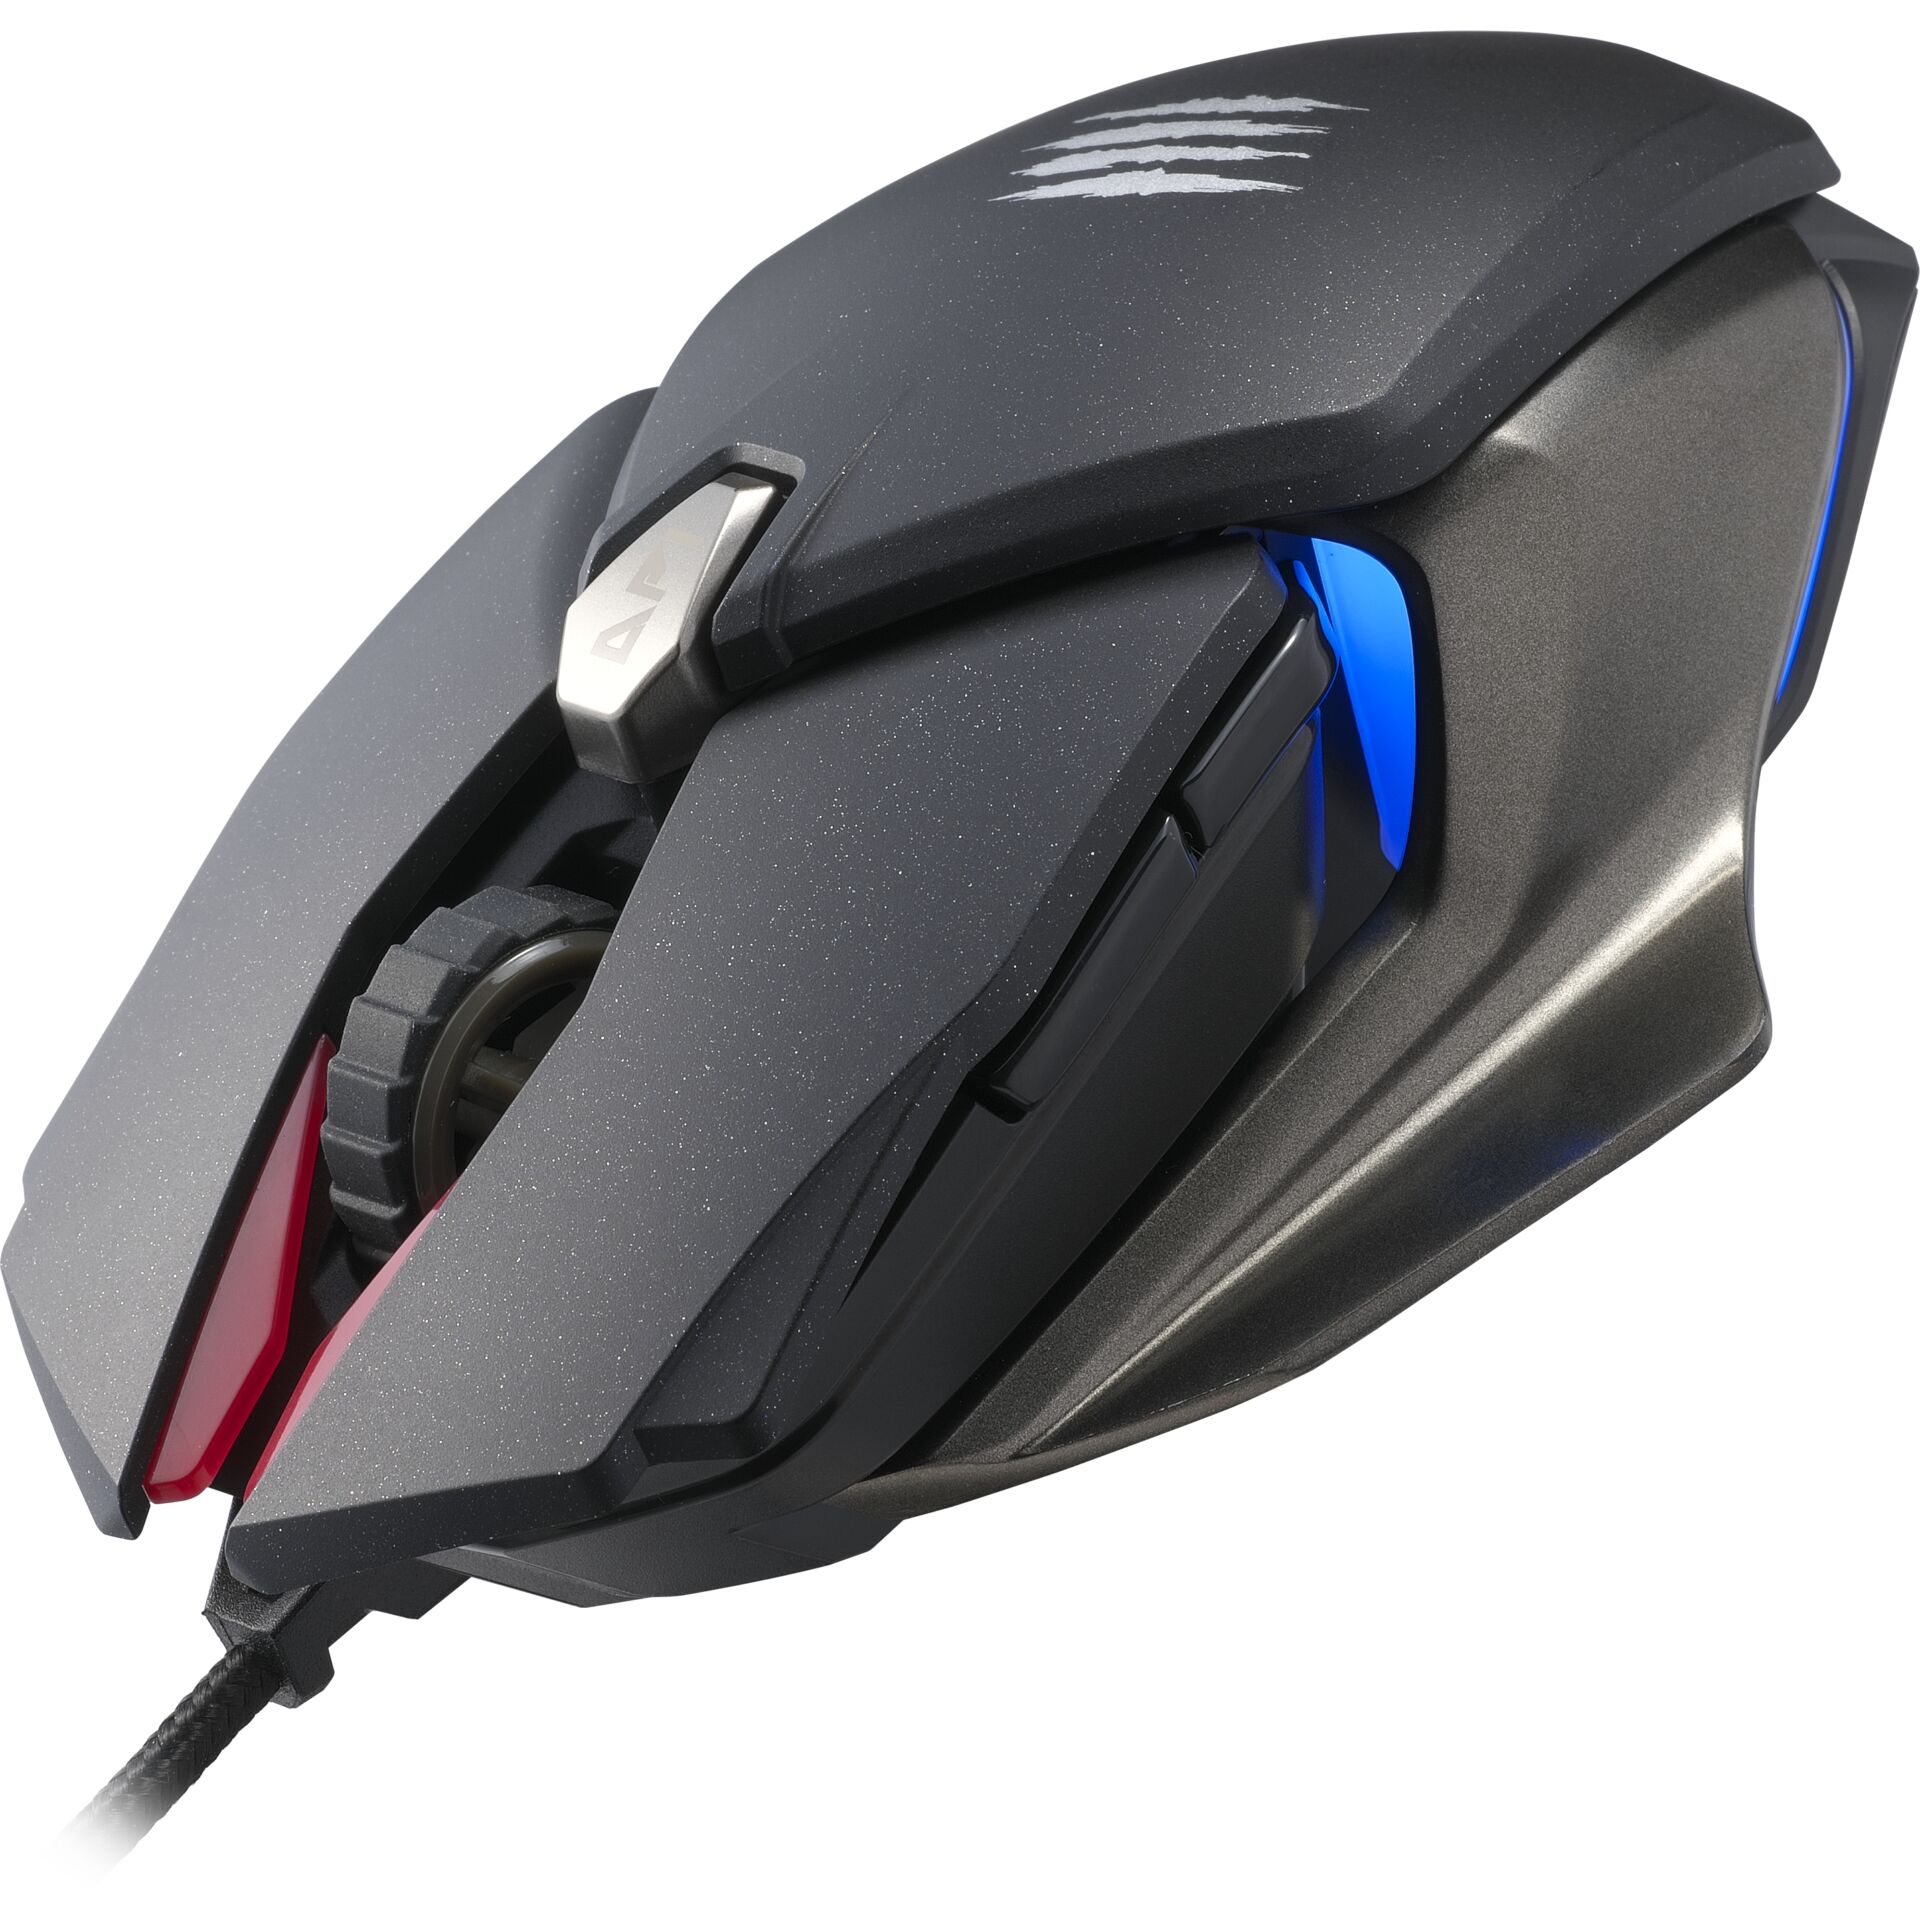 MadCatz B.A.T. 6+ Black Performance Gaming Mouse